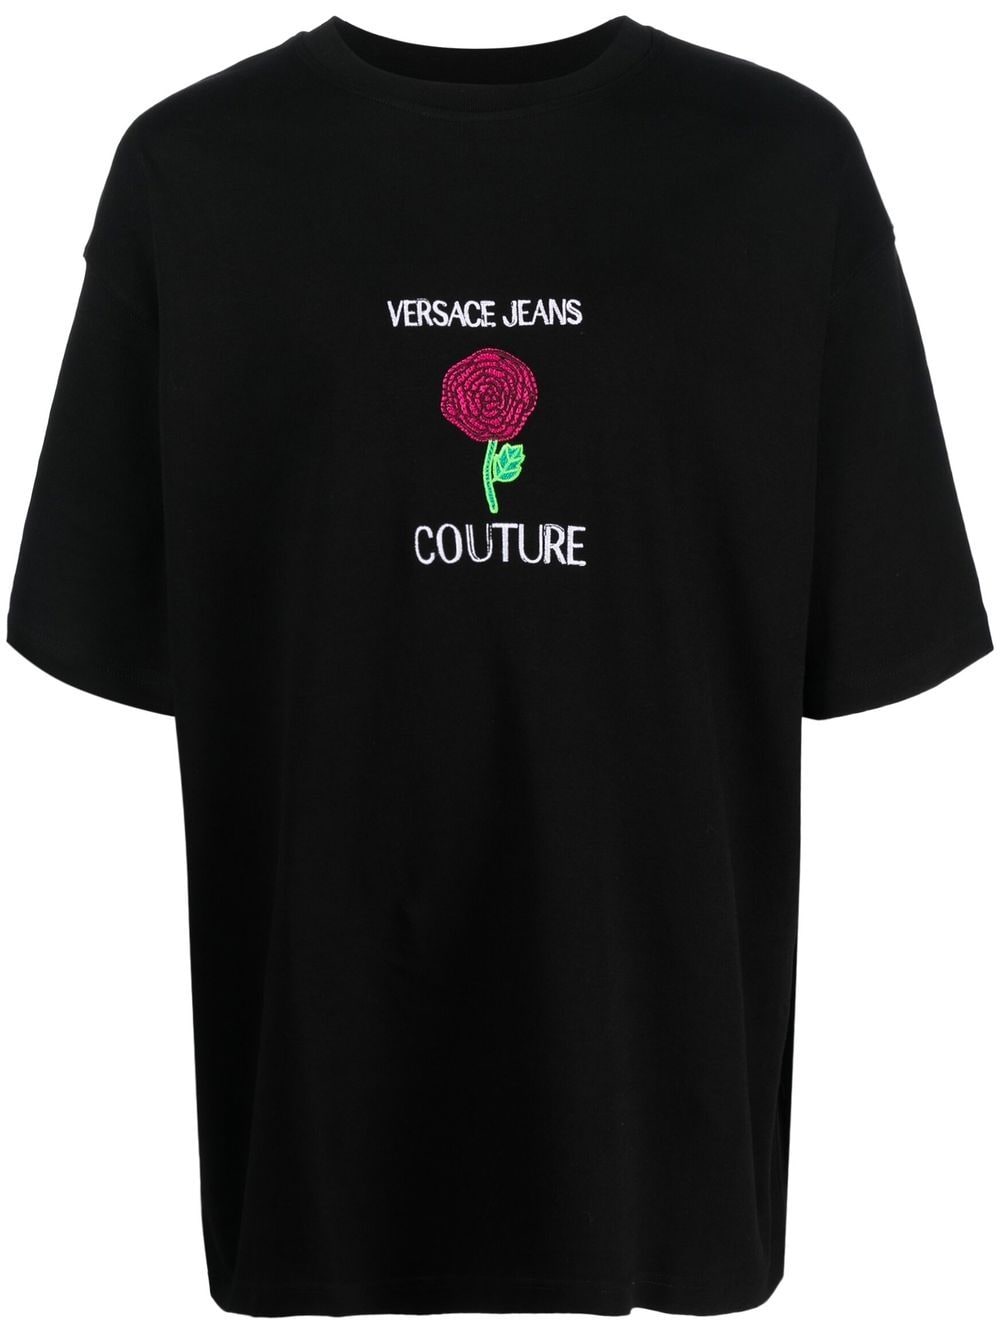 Versace Jeans Couture フローラル Tシャツ - Farfetch